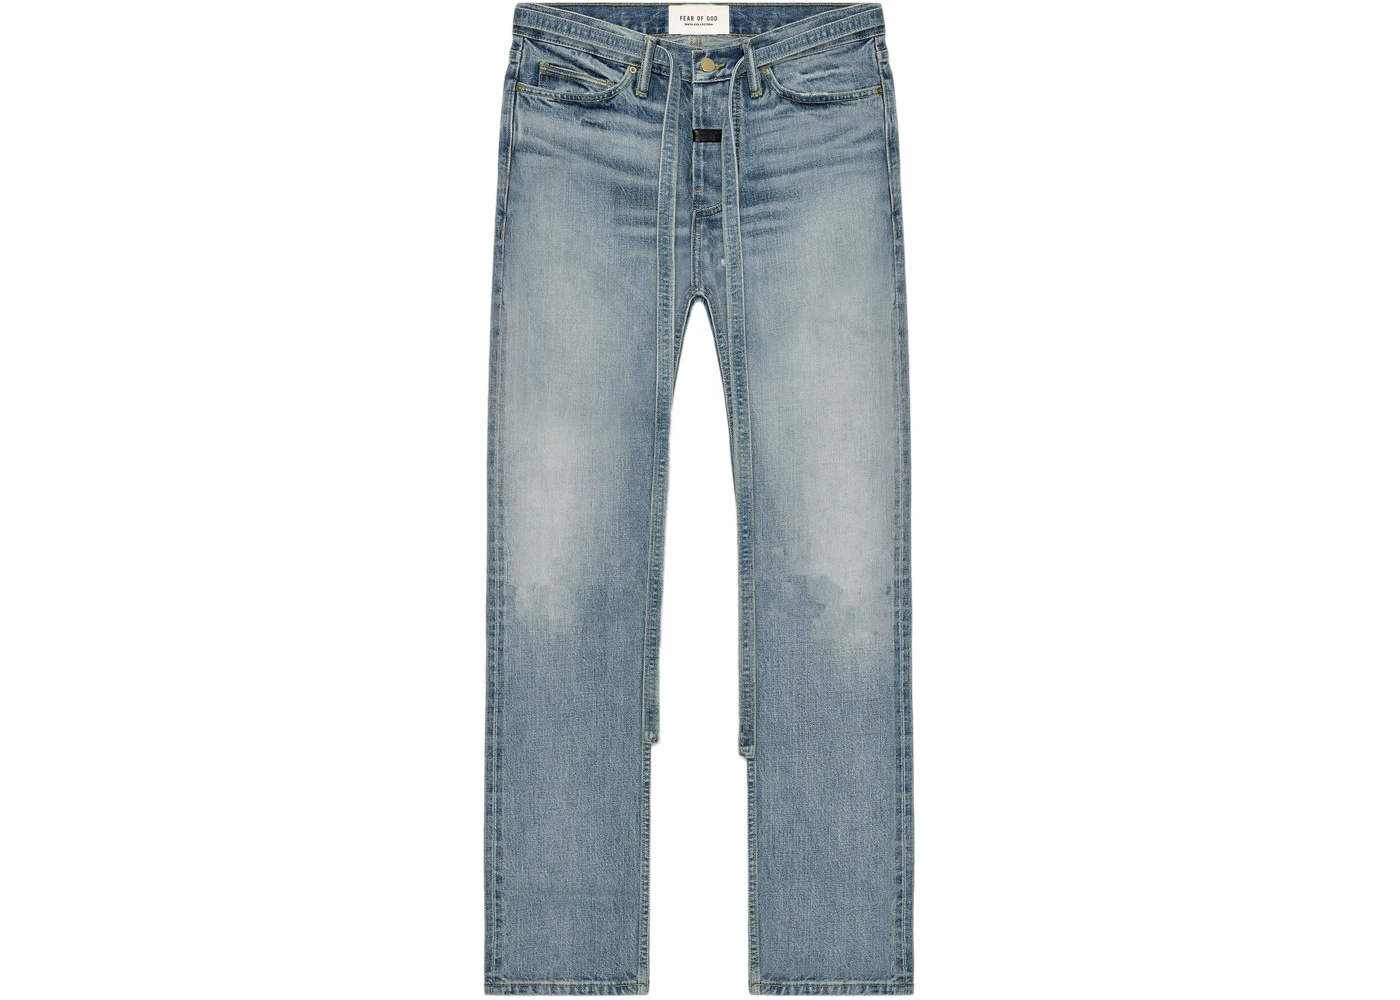 FEAR OF GOD Relaxed Fit Denim Jeans Vintage Indigo - SIXTH COLLECTION ...